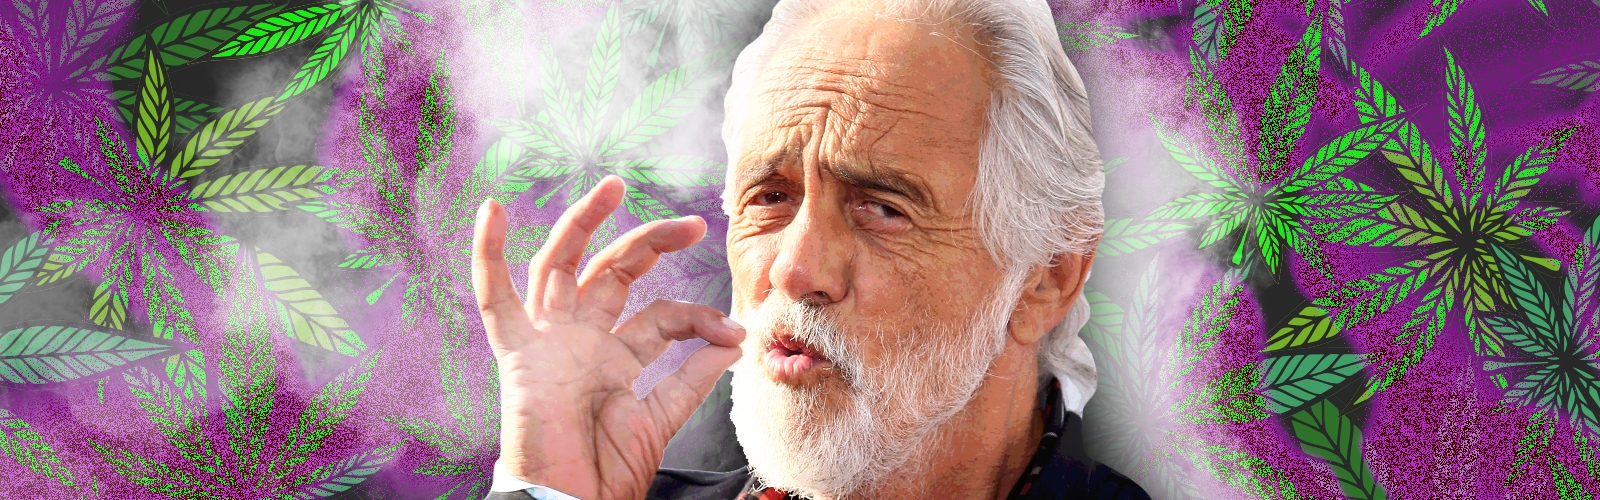 Tommy Chong Interview